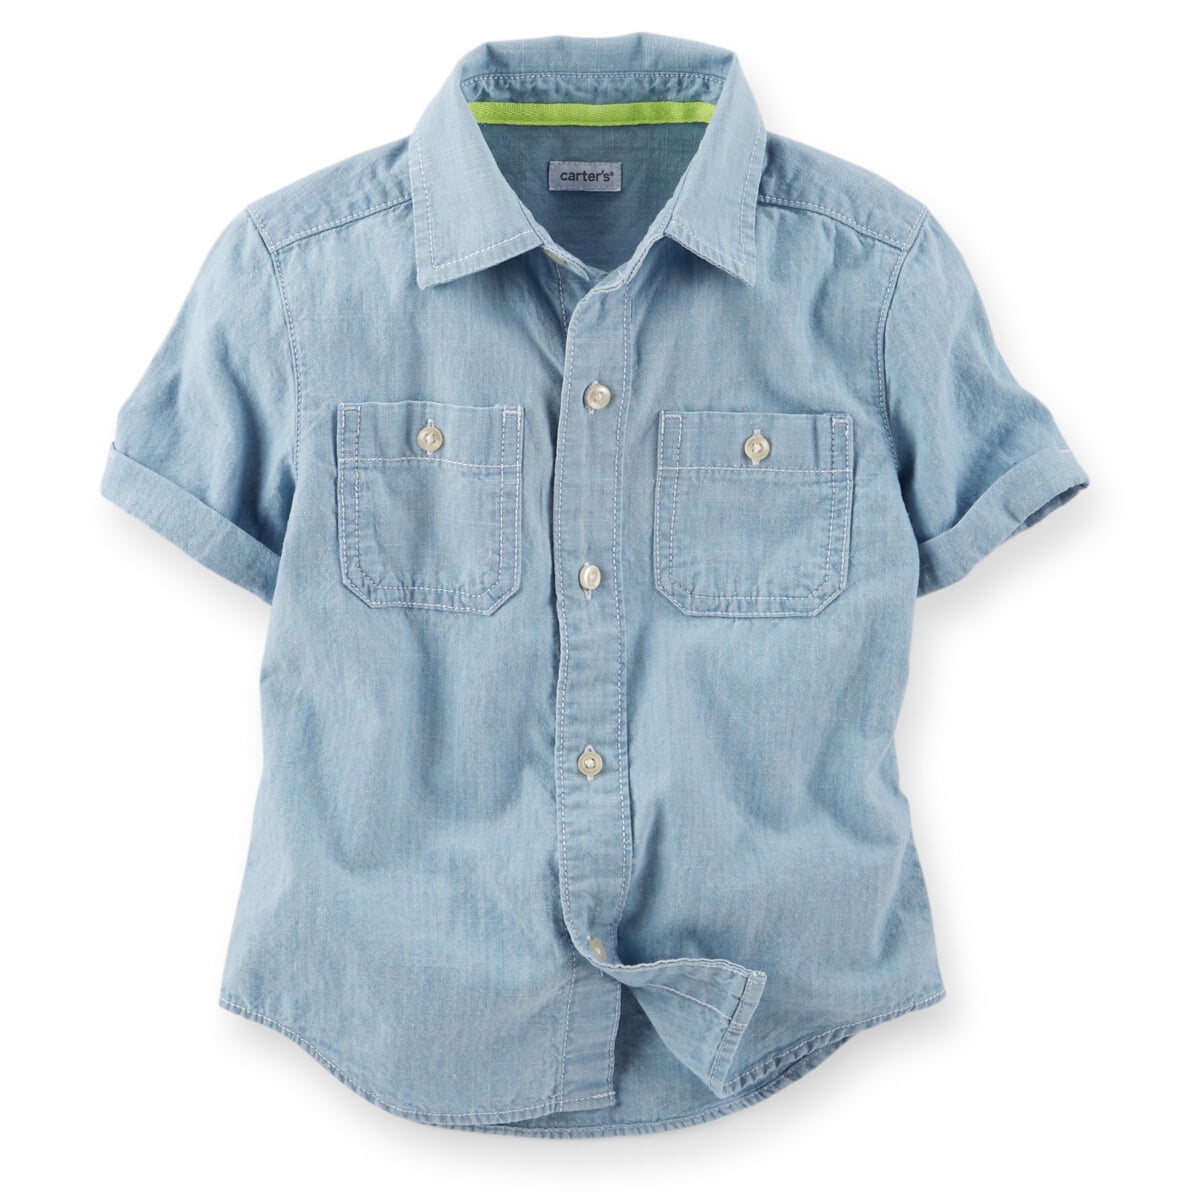 Carter's Carters Baby Clothing Outfit Boys Short Sleeve Chambray Denim ButtonFront Shirt